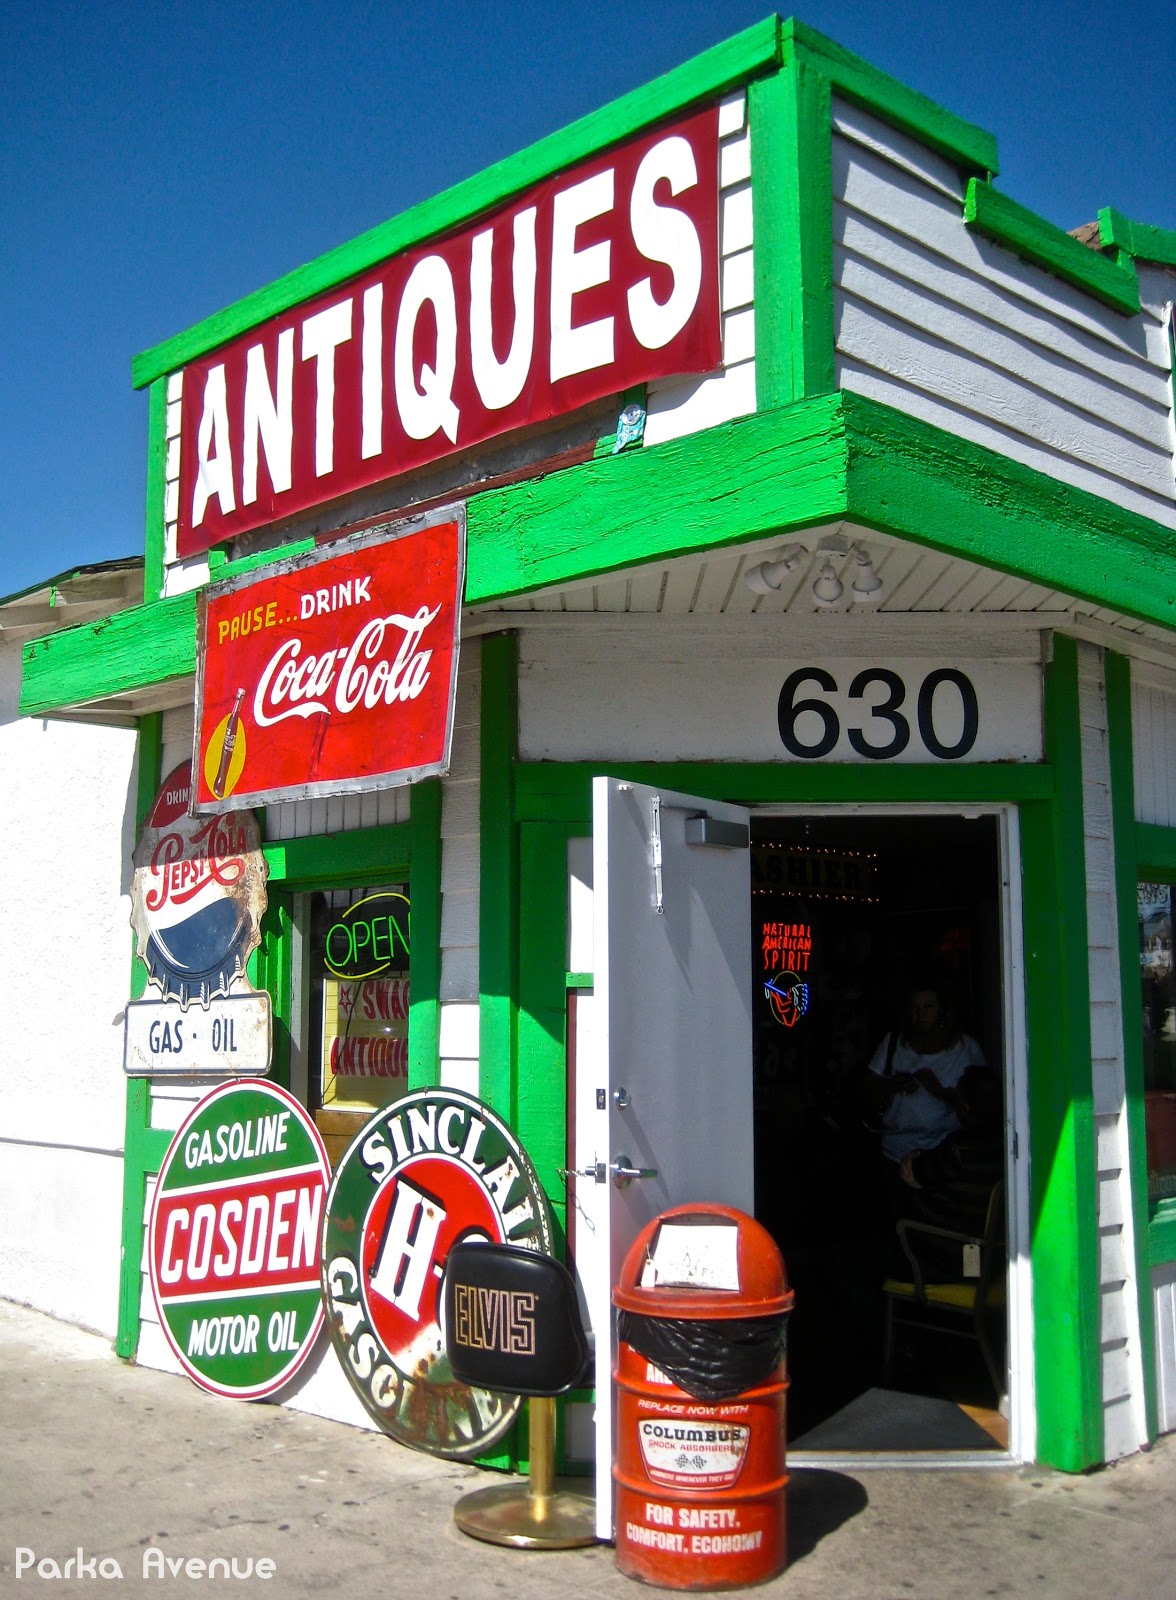 Where can you find antiques in Las Vegas?